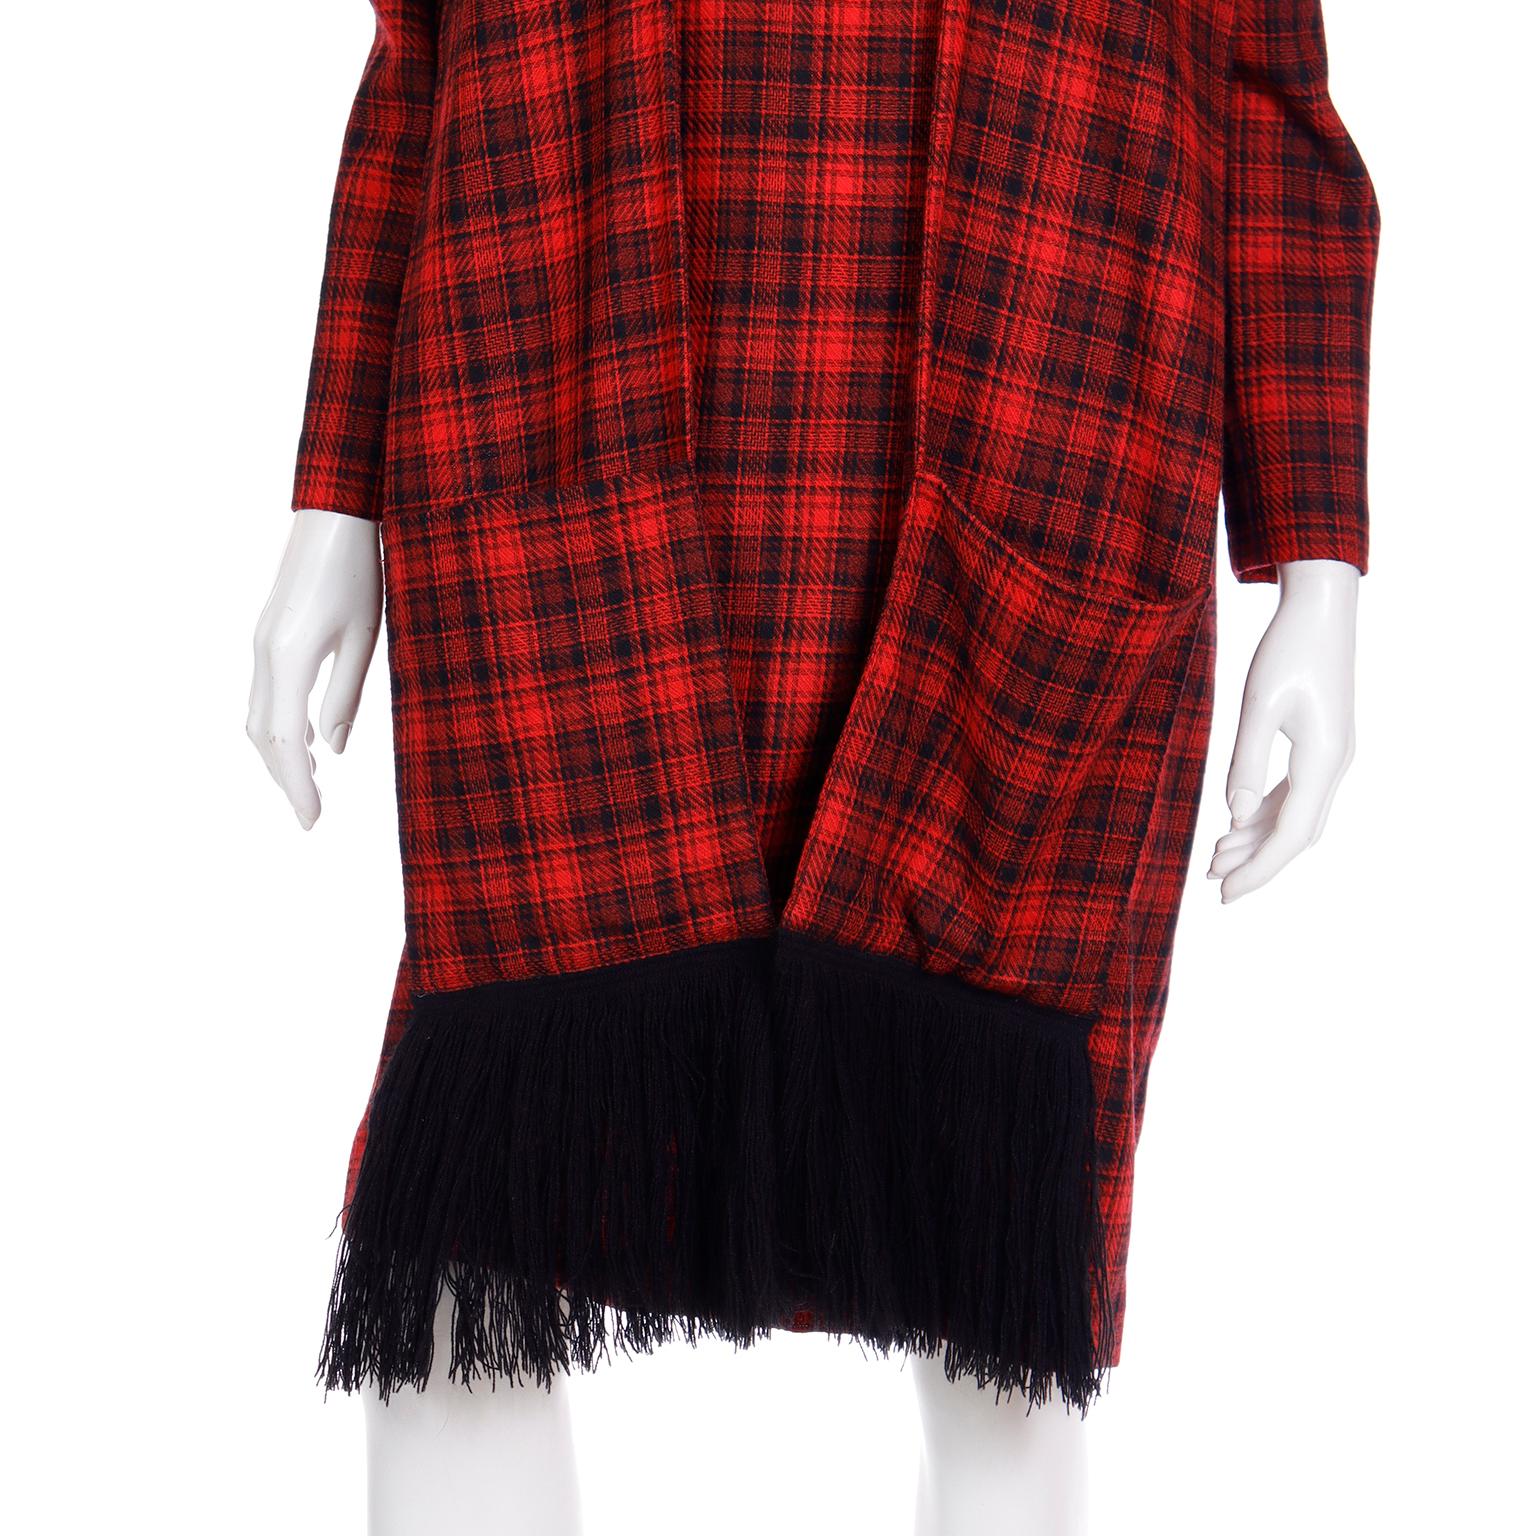 Pierre Cardin Vintage Red Plaid Dress With Long Scarf w Fringe & Pockets For Sale 6